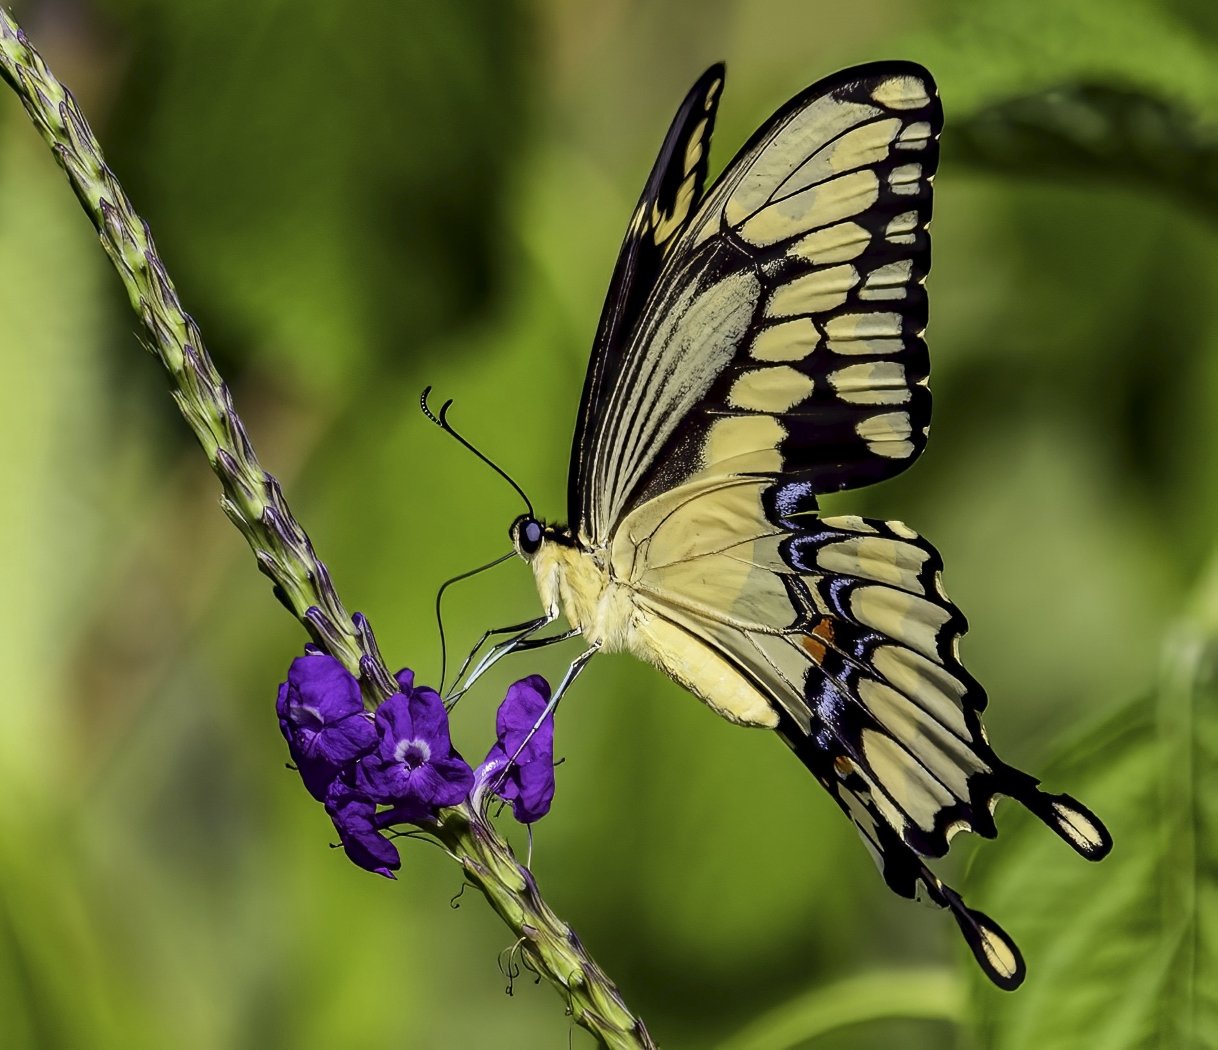  Swallow Tail Butterfly Eatin A Meal, Barry Broussard, Lafayette Photographic Society, 1st Place 